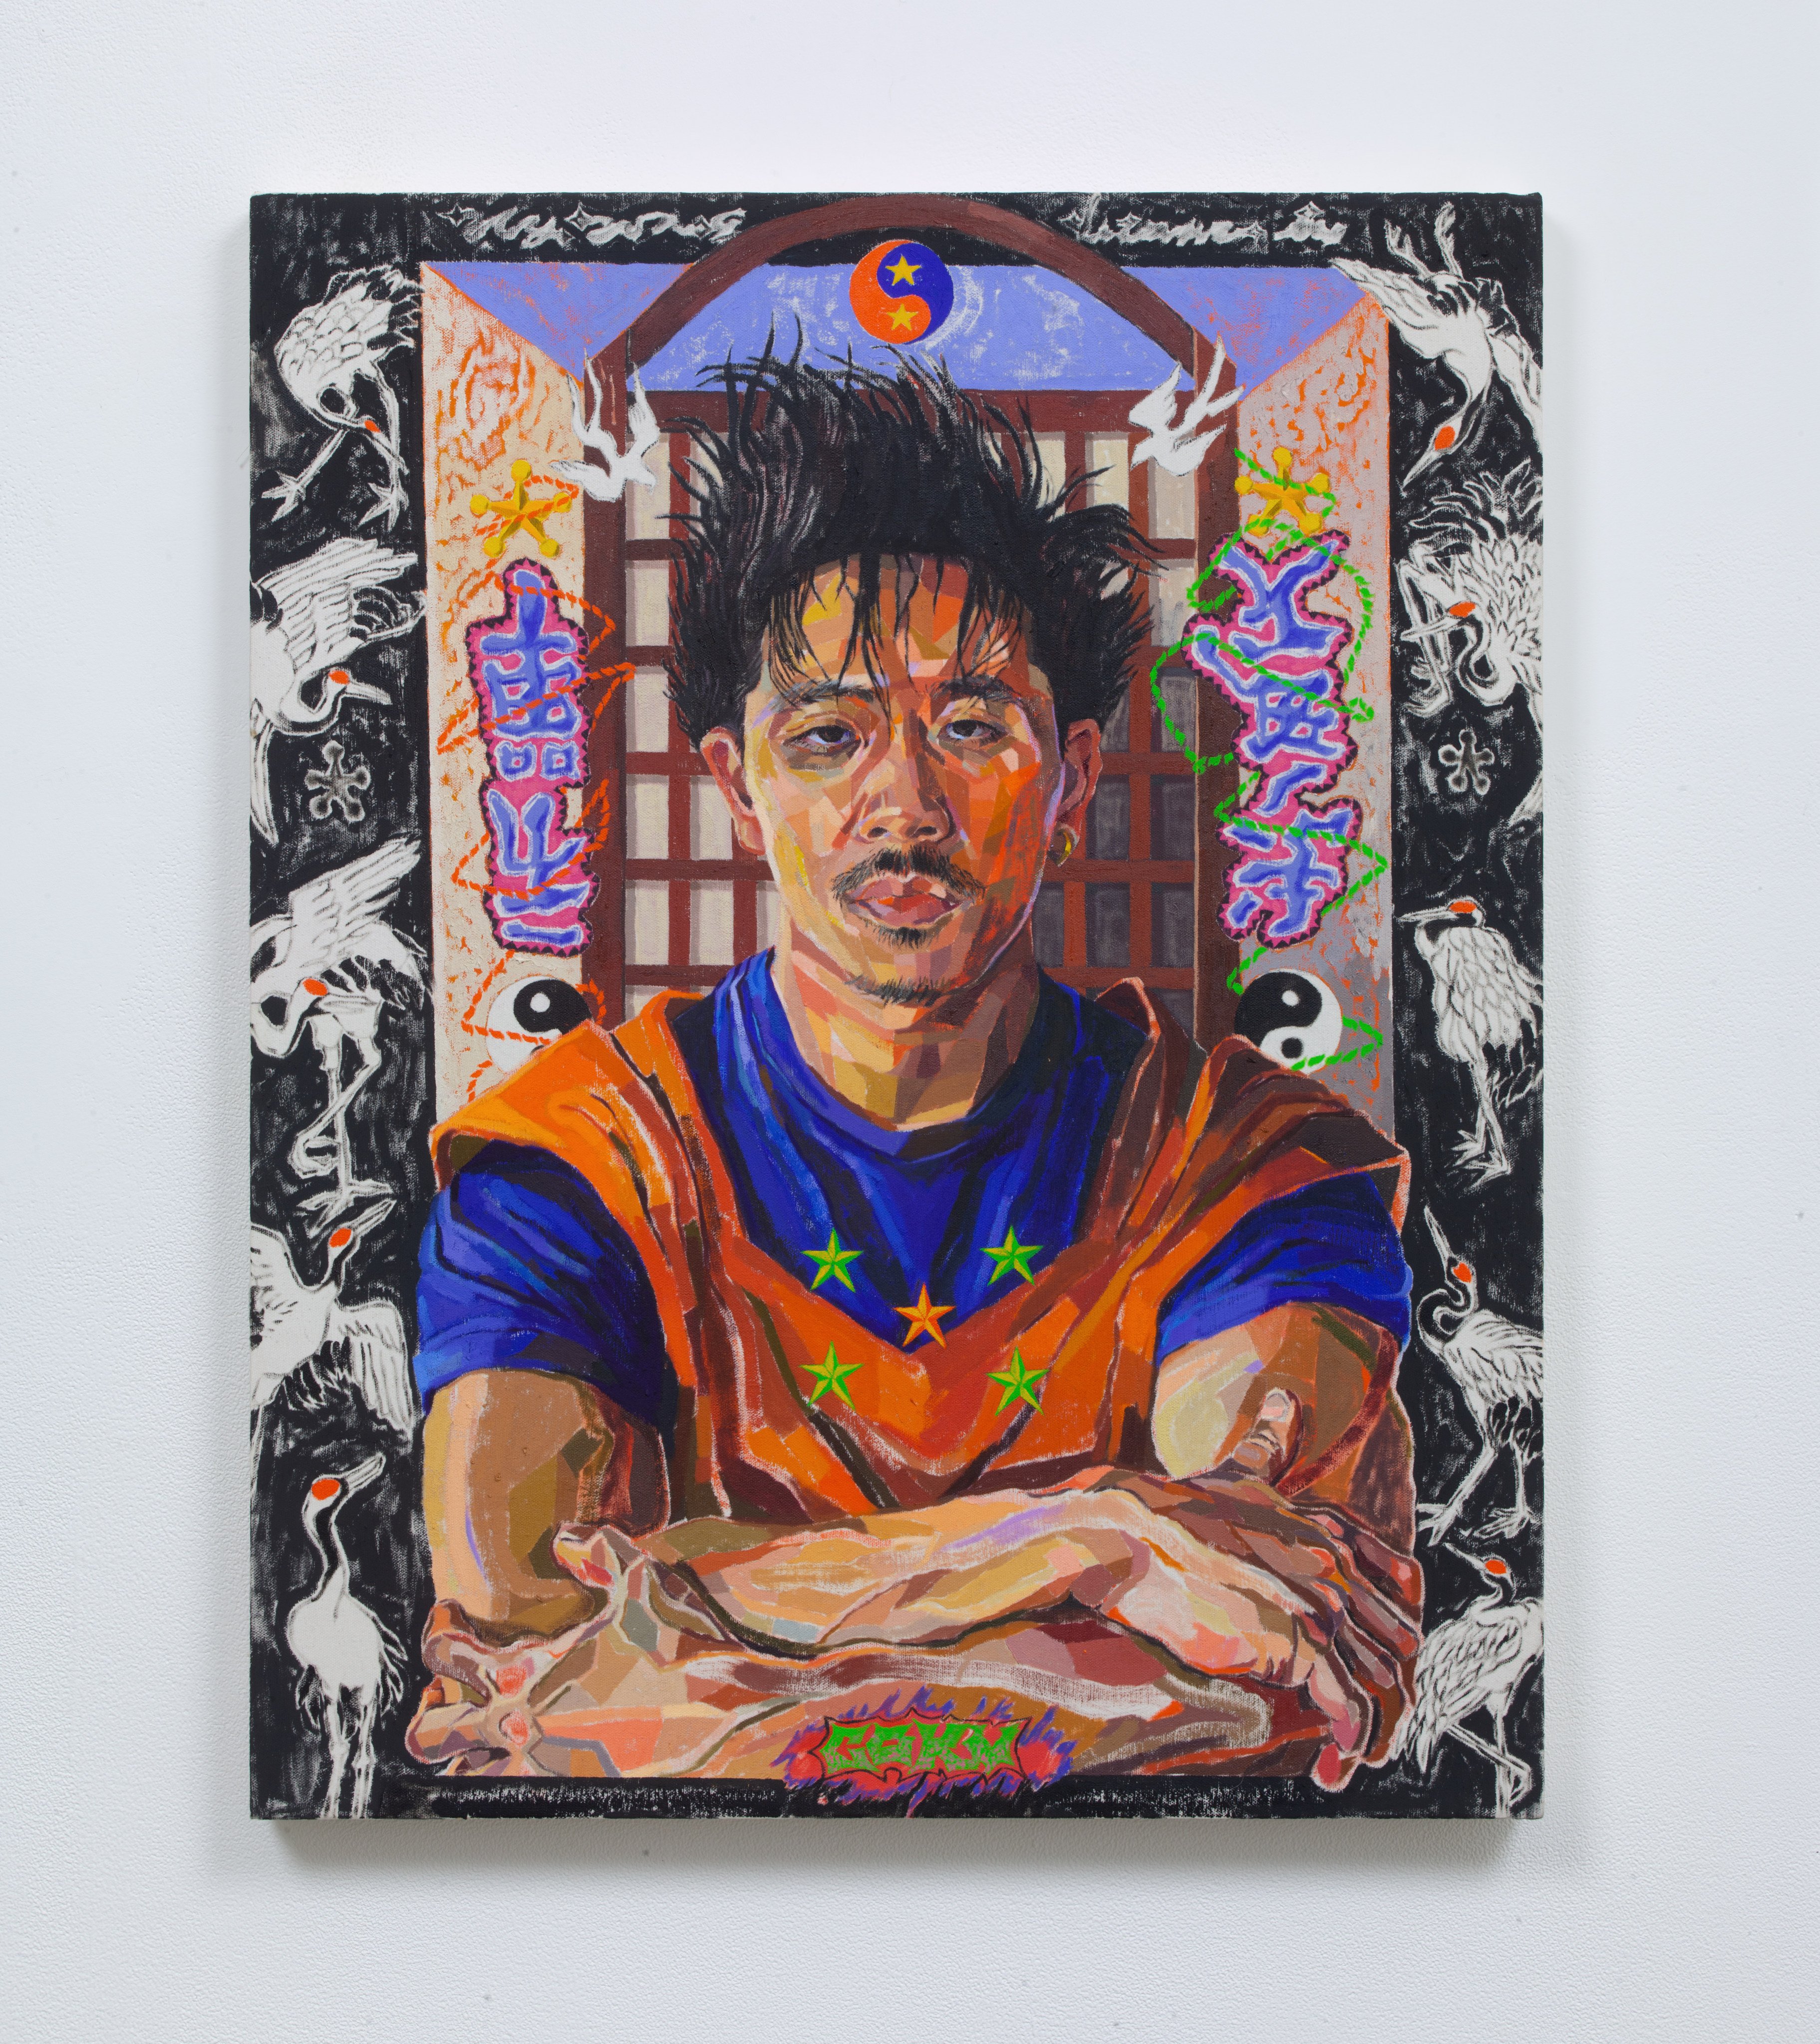 “Coolieism, aka: Sly Son Goku” (2021), by Oscar yi Hou, based on a character from the popular manga series Dragon Ball, mixes Asian and American iconography. Photo: Oscar yi Hou